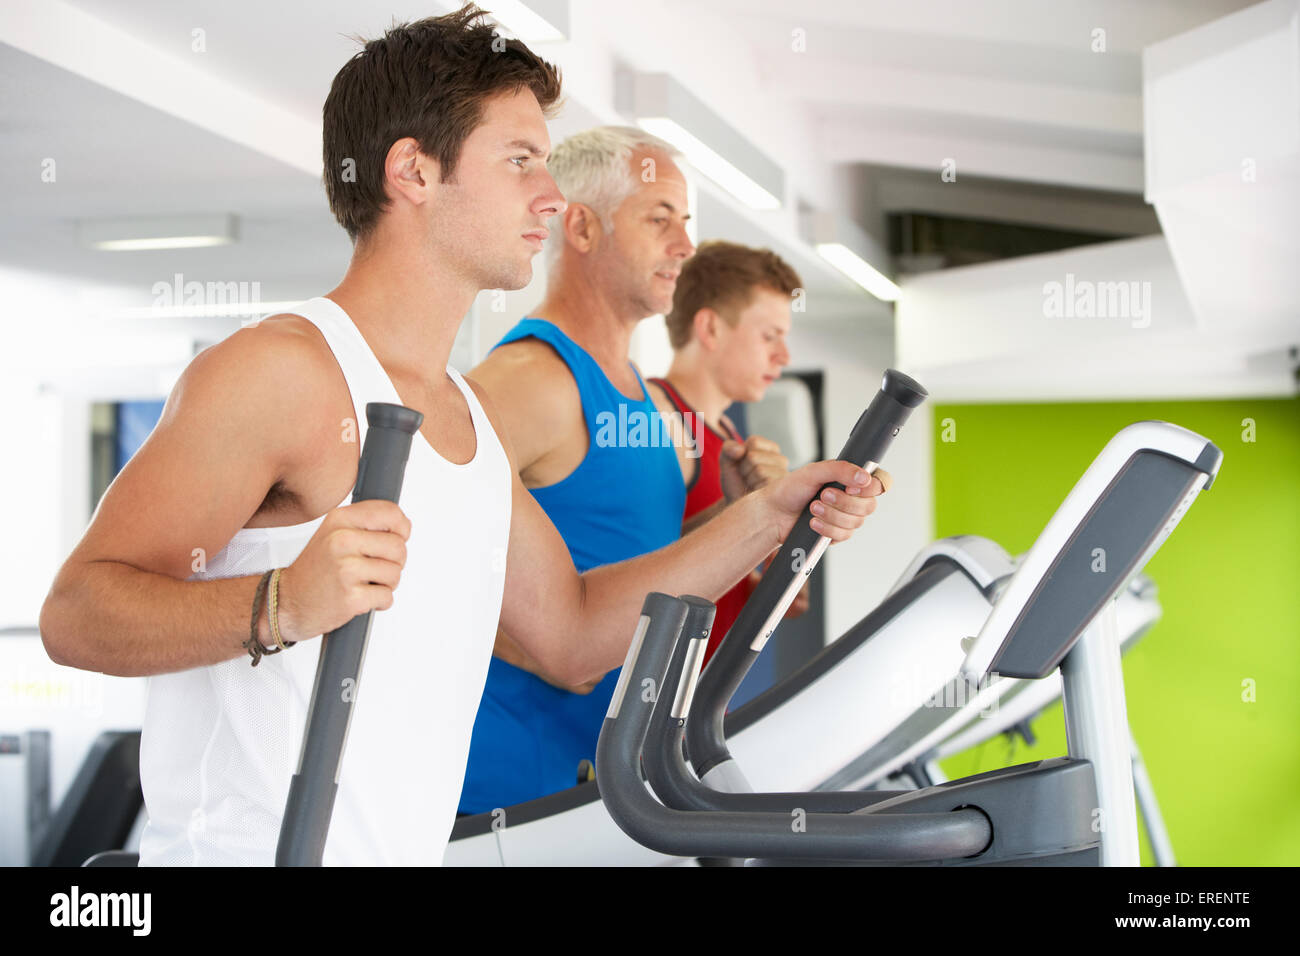 Group Of People Using Different Gym Equipment Stock Photo